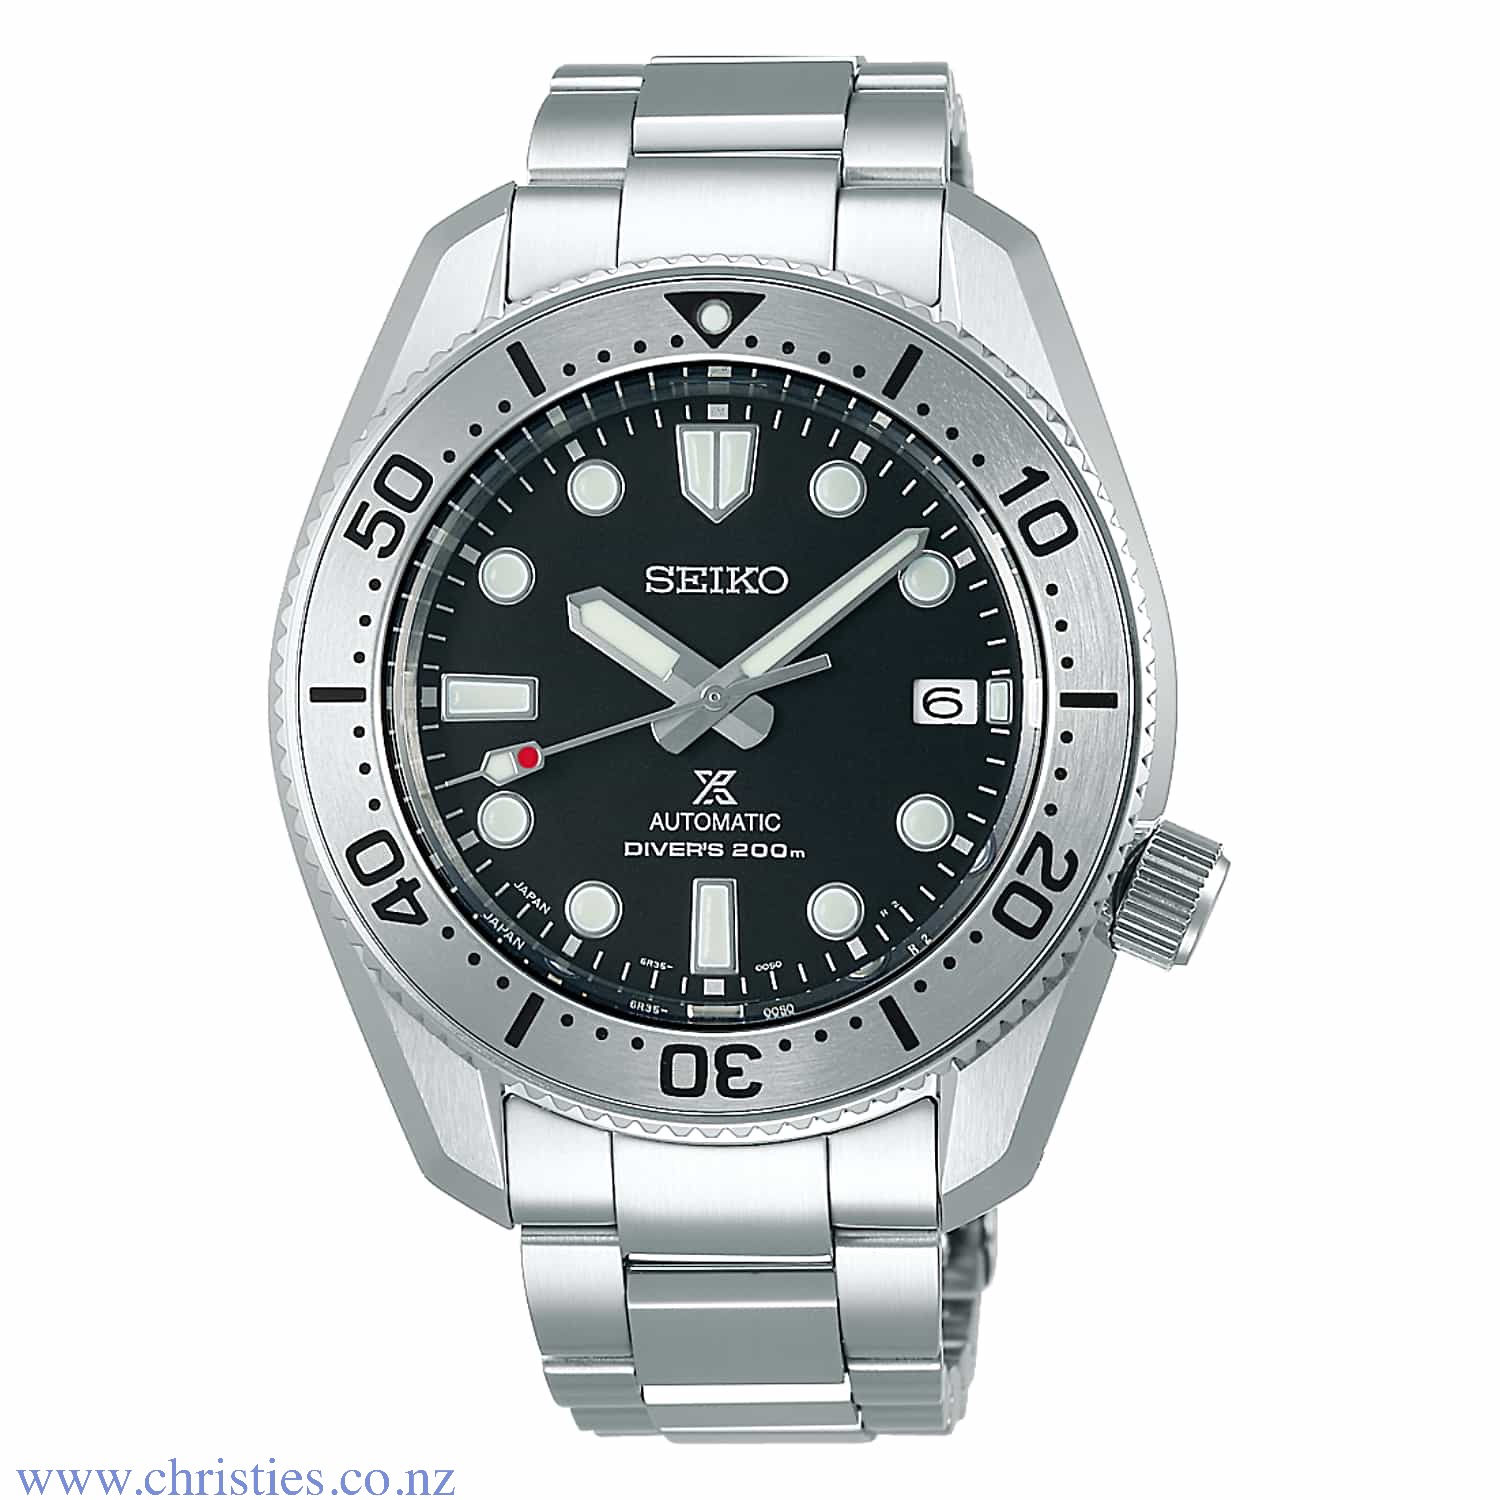 SPB185J1 SEIKO Prospex Automatic Marine Master Dive Watch. Seiko SPB185J1 is a practical and attractive Gents watch. Case is made out of Stainless Steel and the Black dial gives the watch that unique look. This model has got 200 metres water resistancy - 